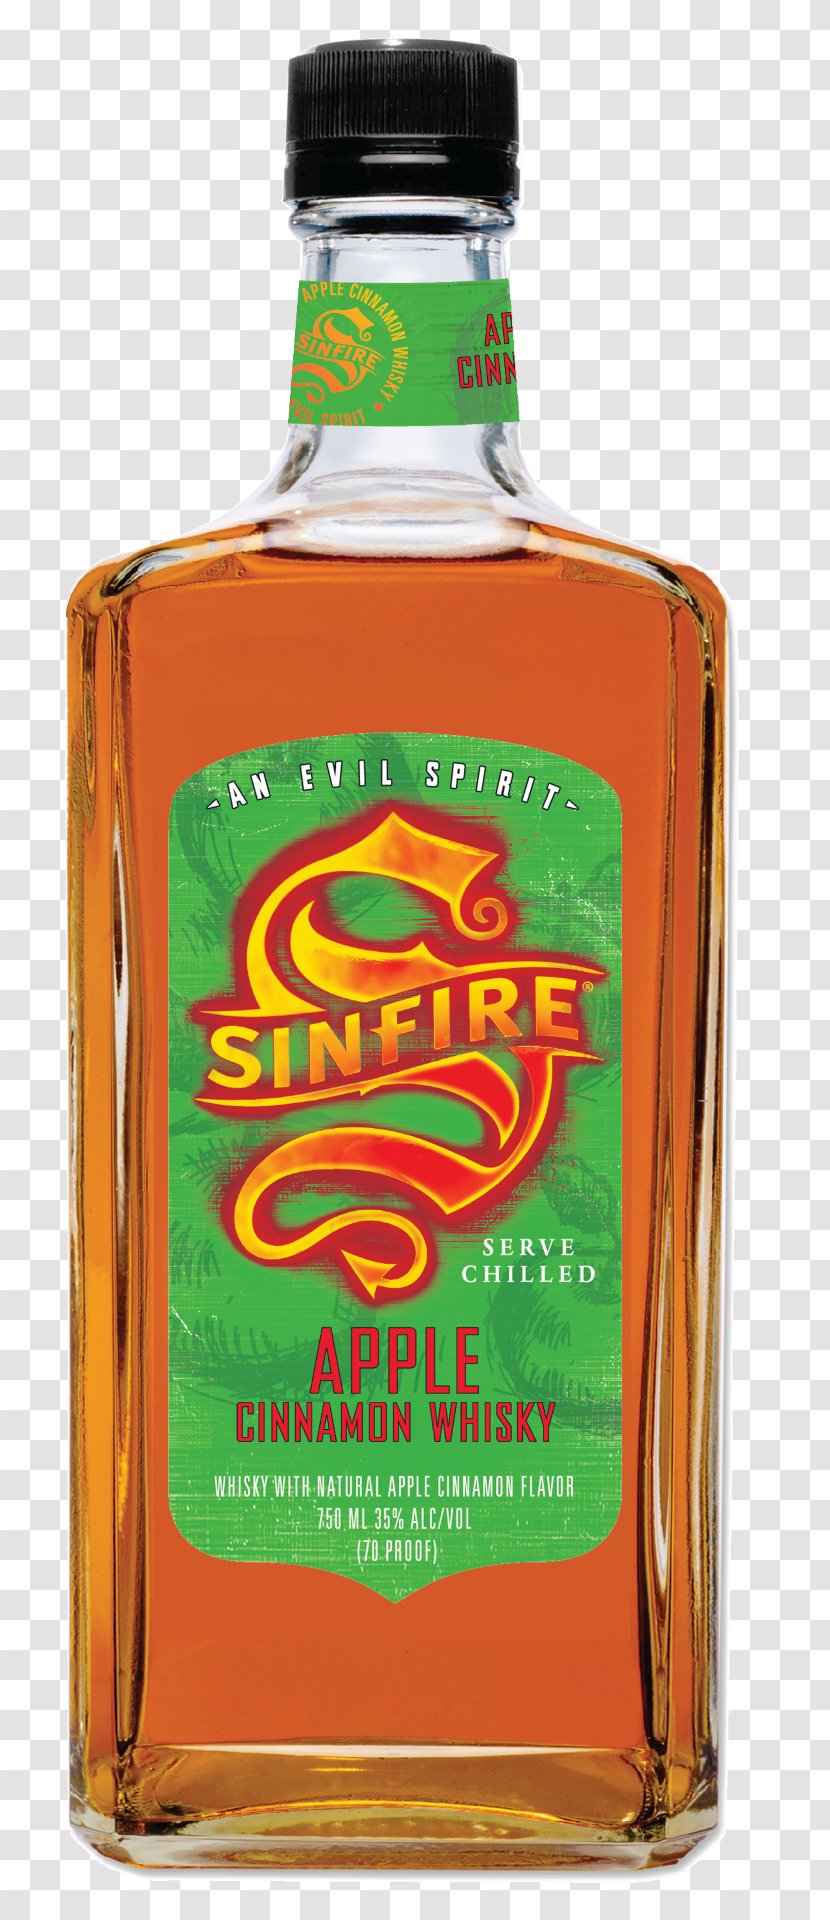 Sinfire Fireball Cinnamon Whisky Whiskey Canadian Liquor - Alcoholic Beverage - Drink Recipes Transparent PNG